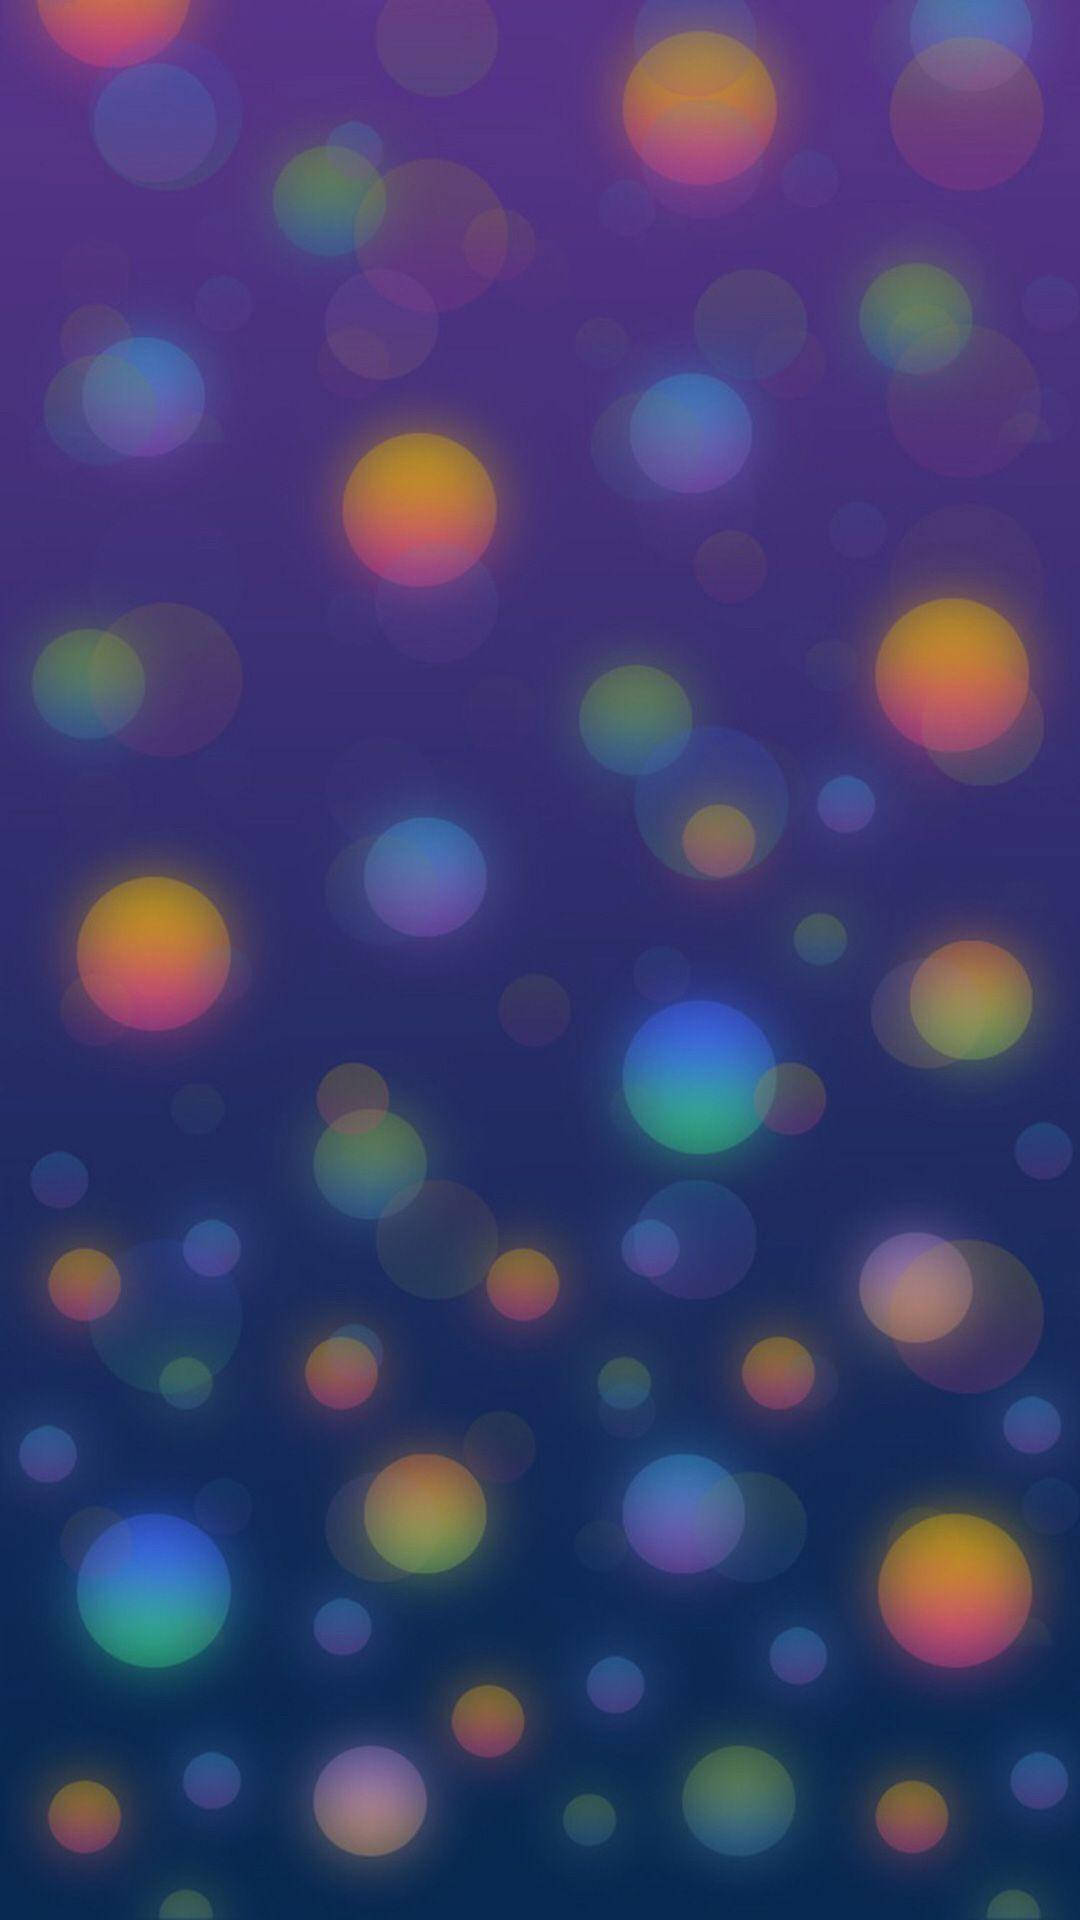 Colorful Blurry Dots Iphone 8 Live Wallpaper